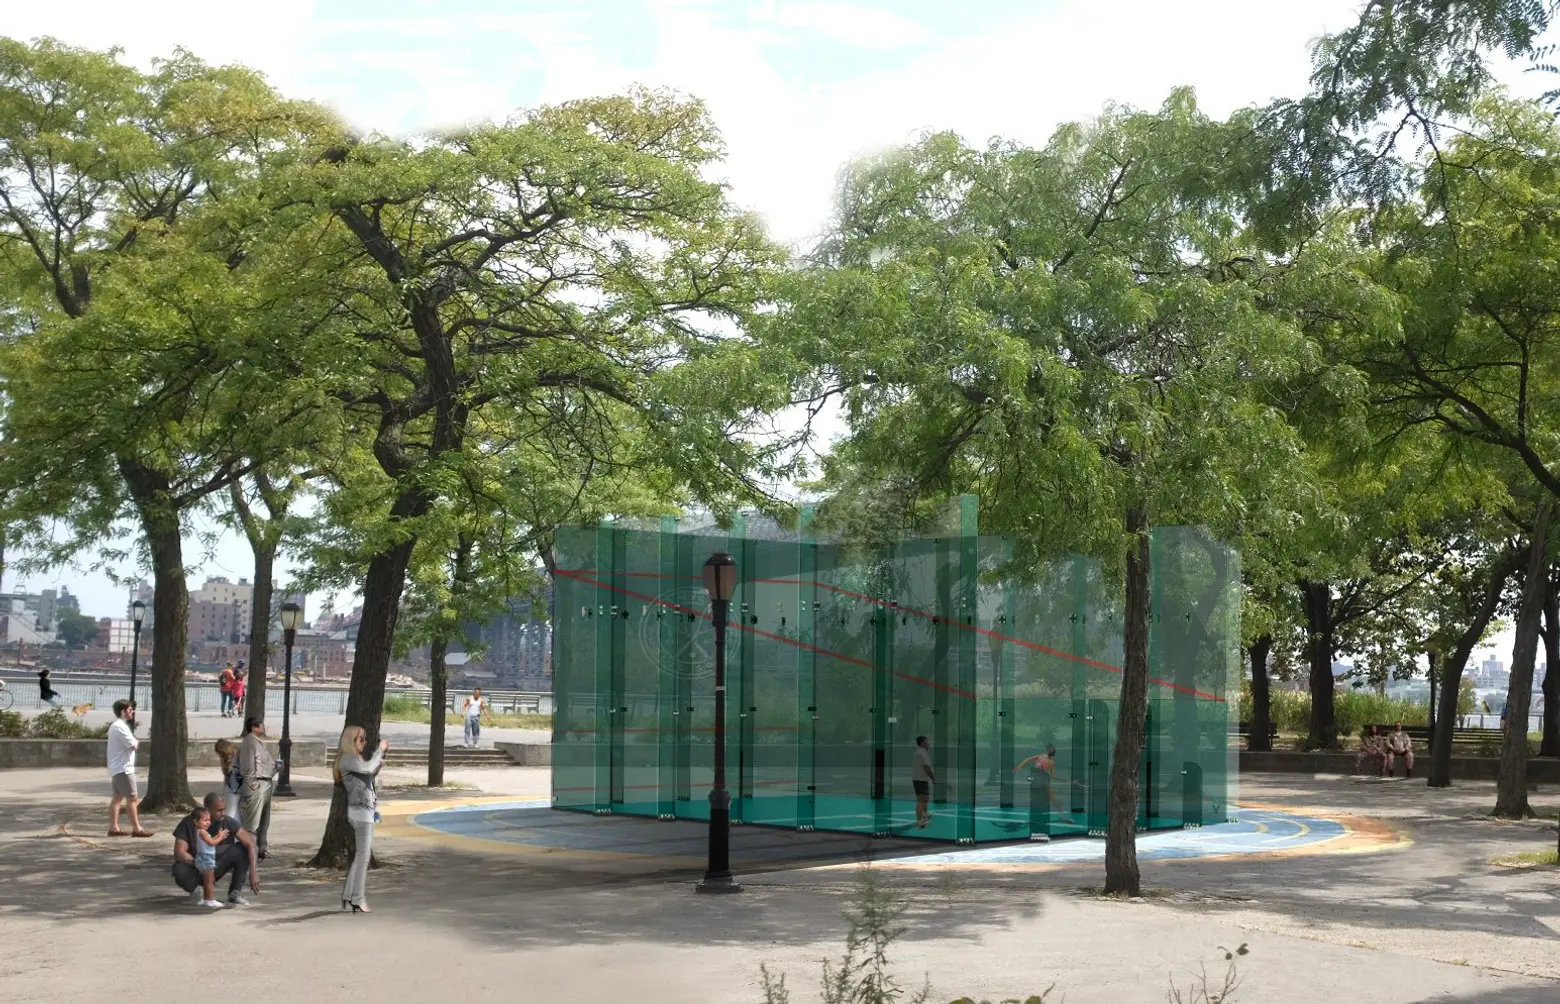 The world’s first public outdoor squash court opens on the Lower East Side